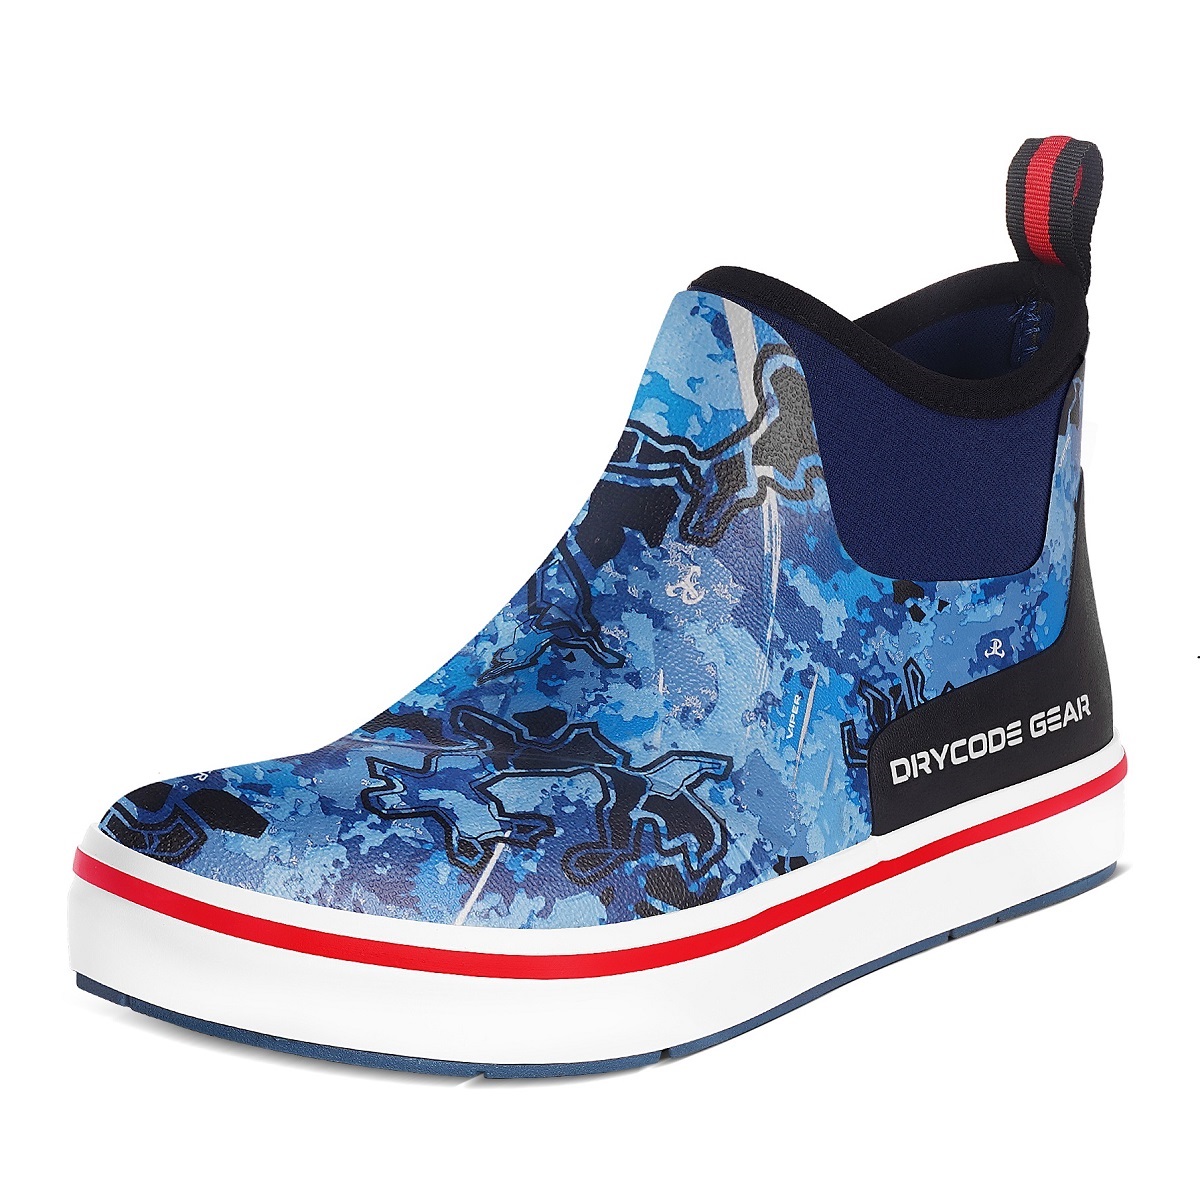 DRYCODE Deck Fishing Boots （Blue Camo）, Anti-Slip Rubber Ankle Boots